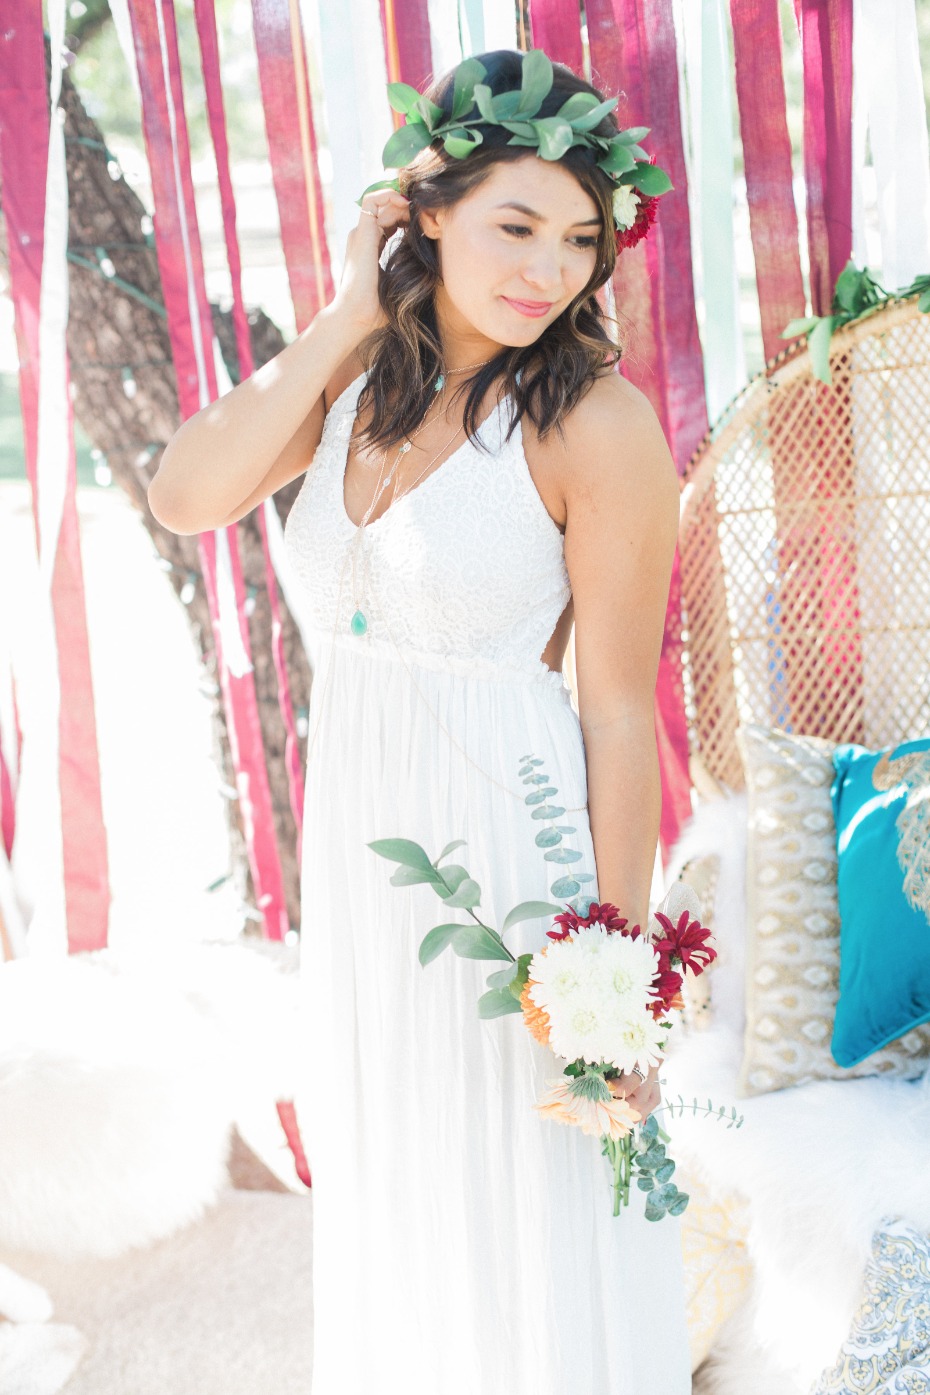 Love this bridal shower look